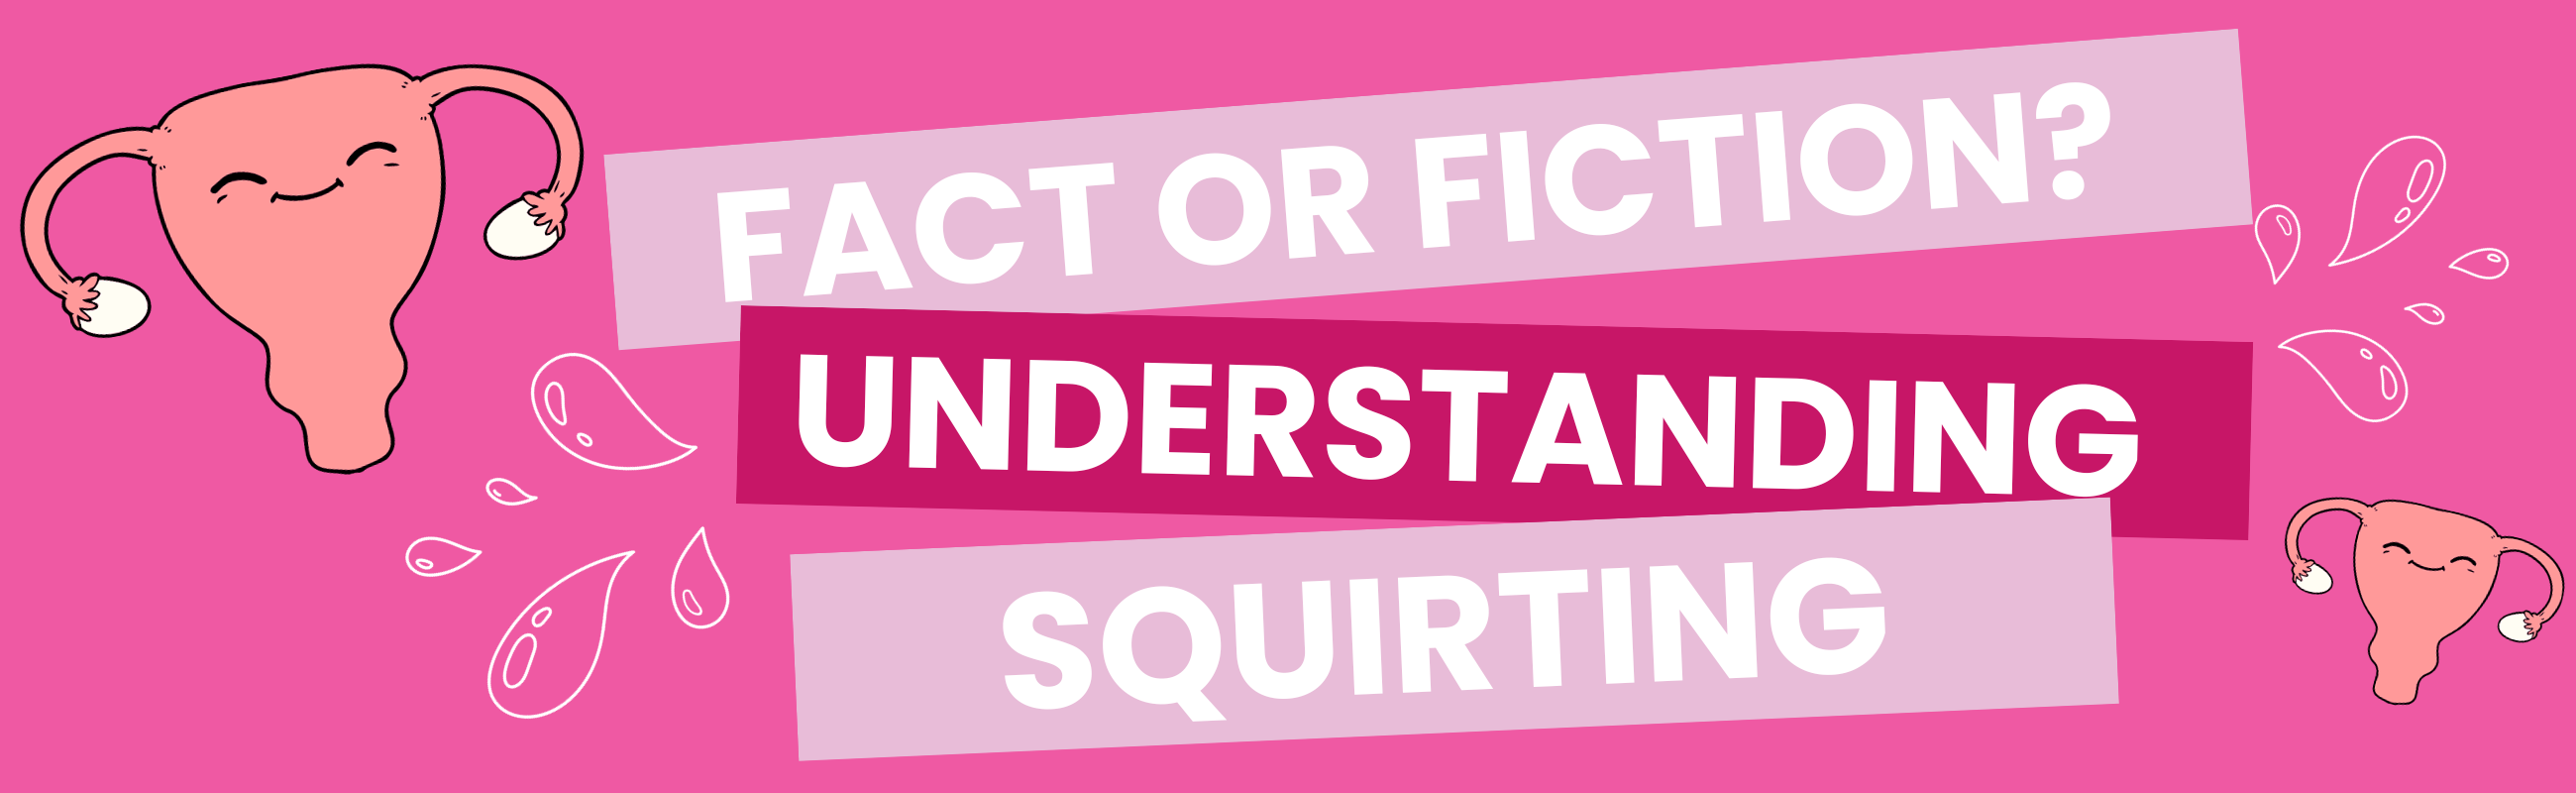 Image of female productive organs with text that reads: Fact or Fiction? Understanding Squirting